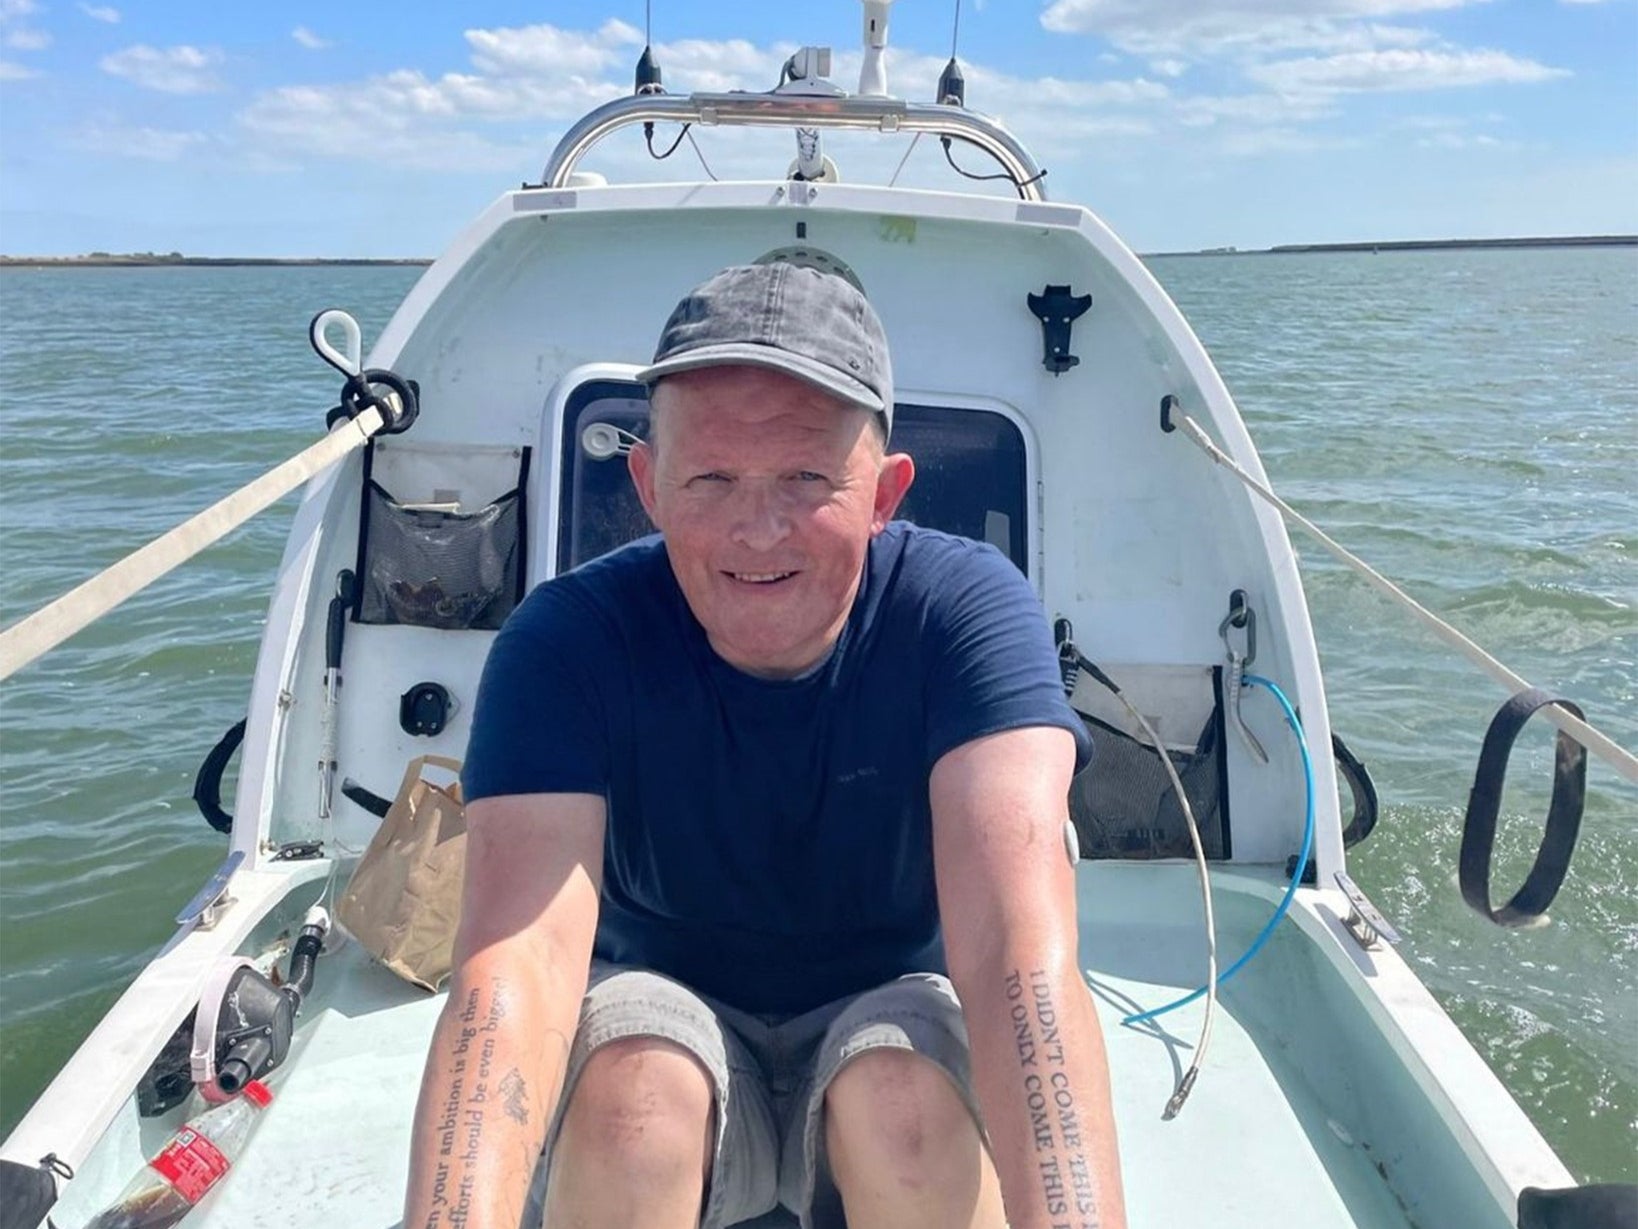 Michael Holt, 54, began sailing on 24 January to row for two charities